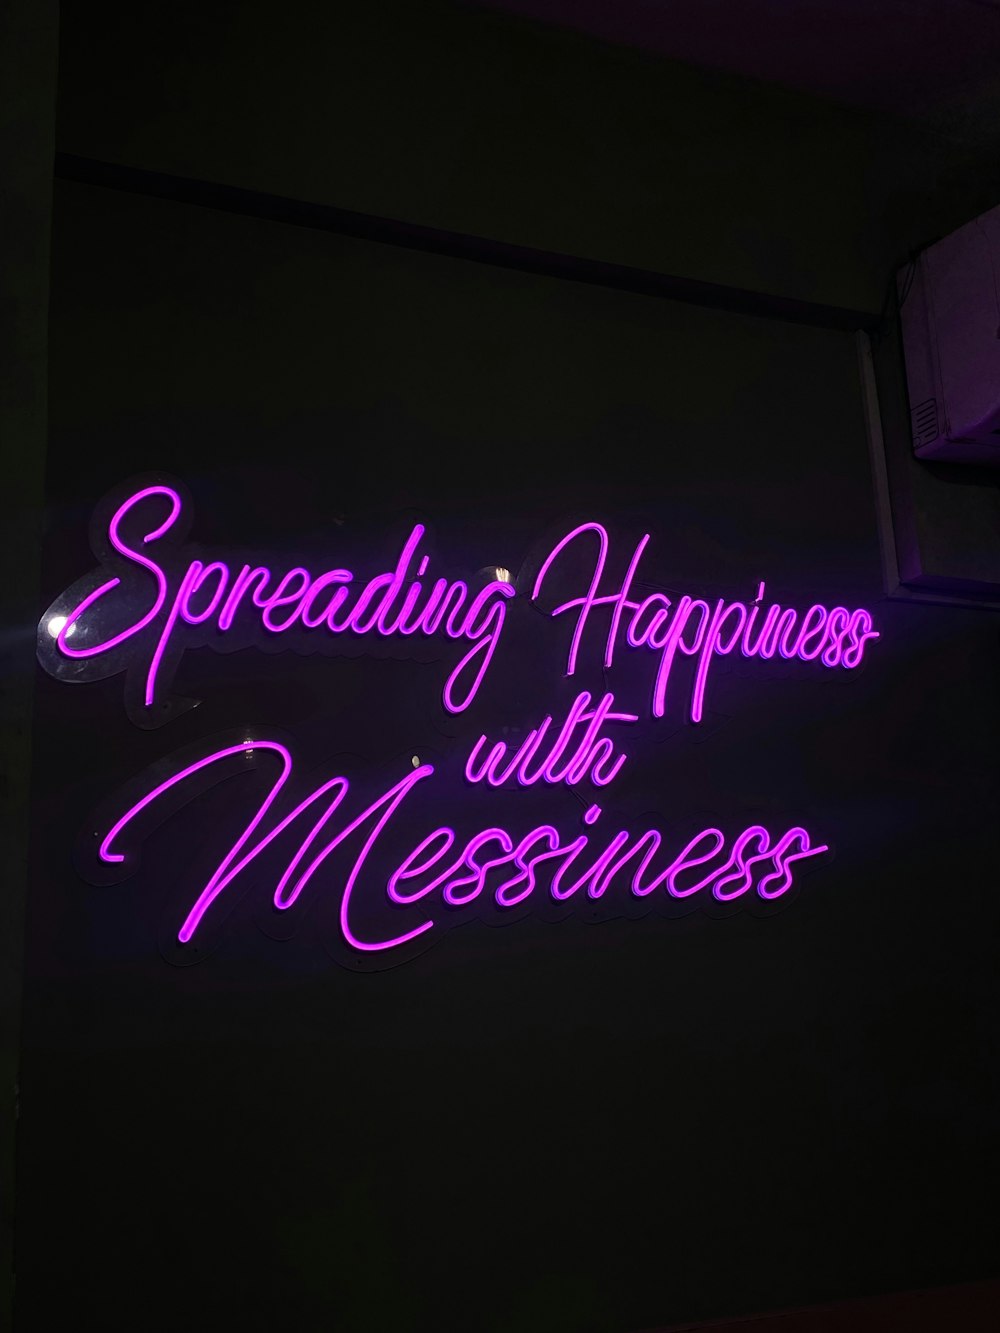 a neon sign that says spreading happiness with messness